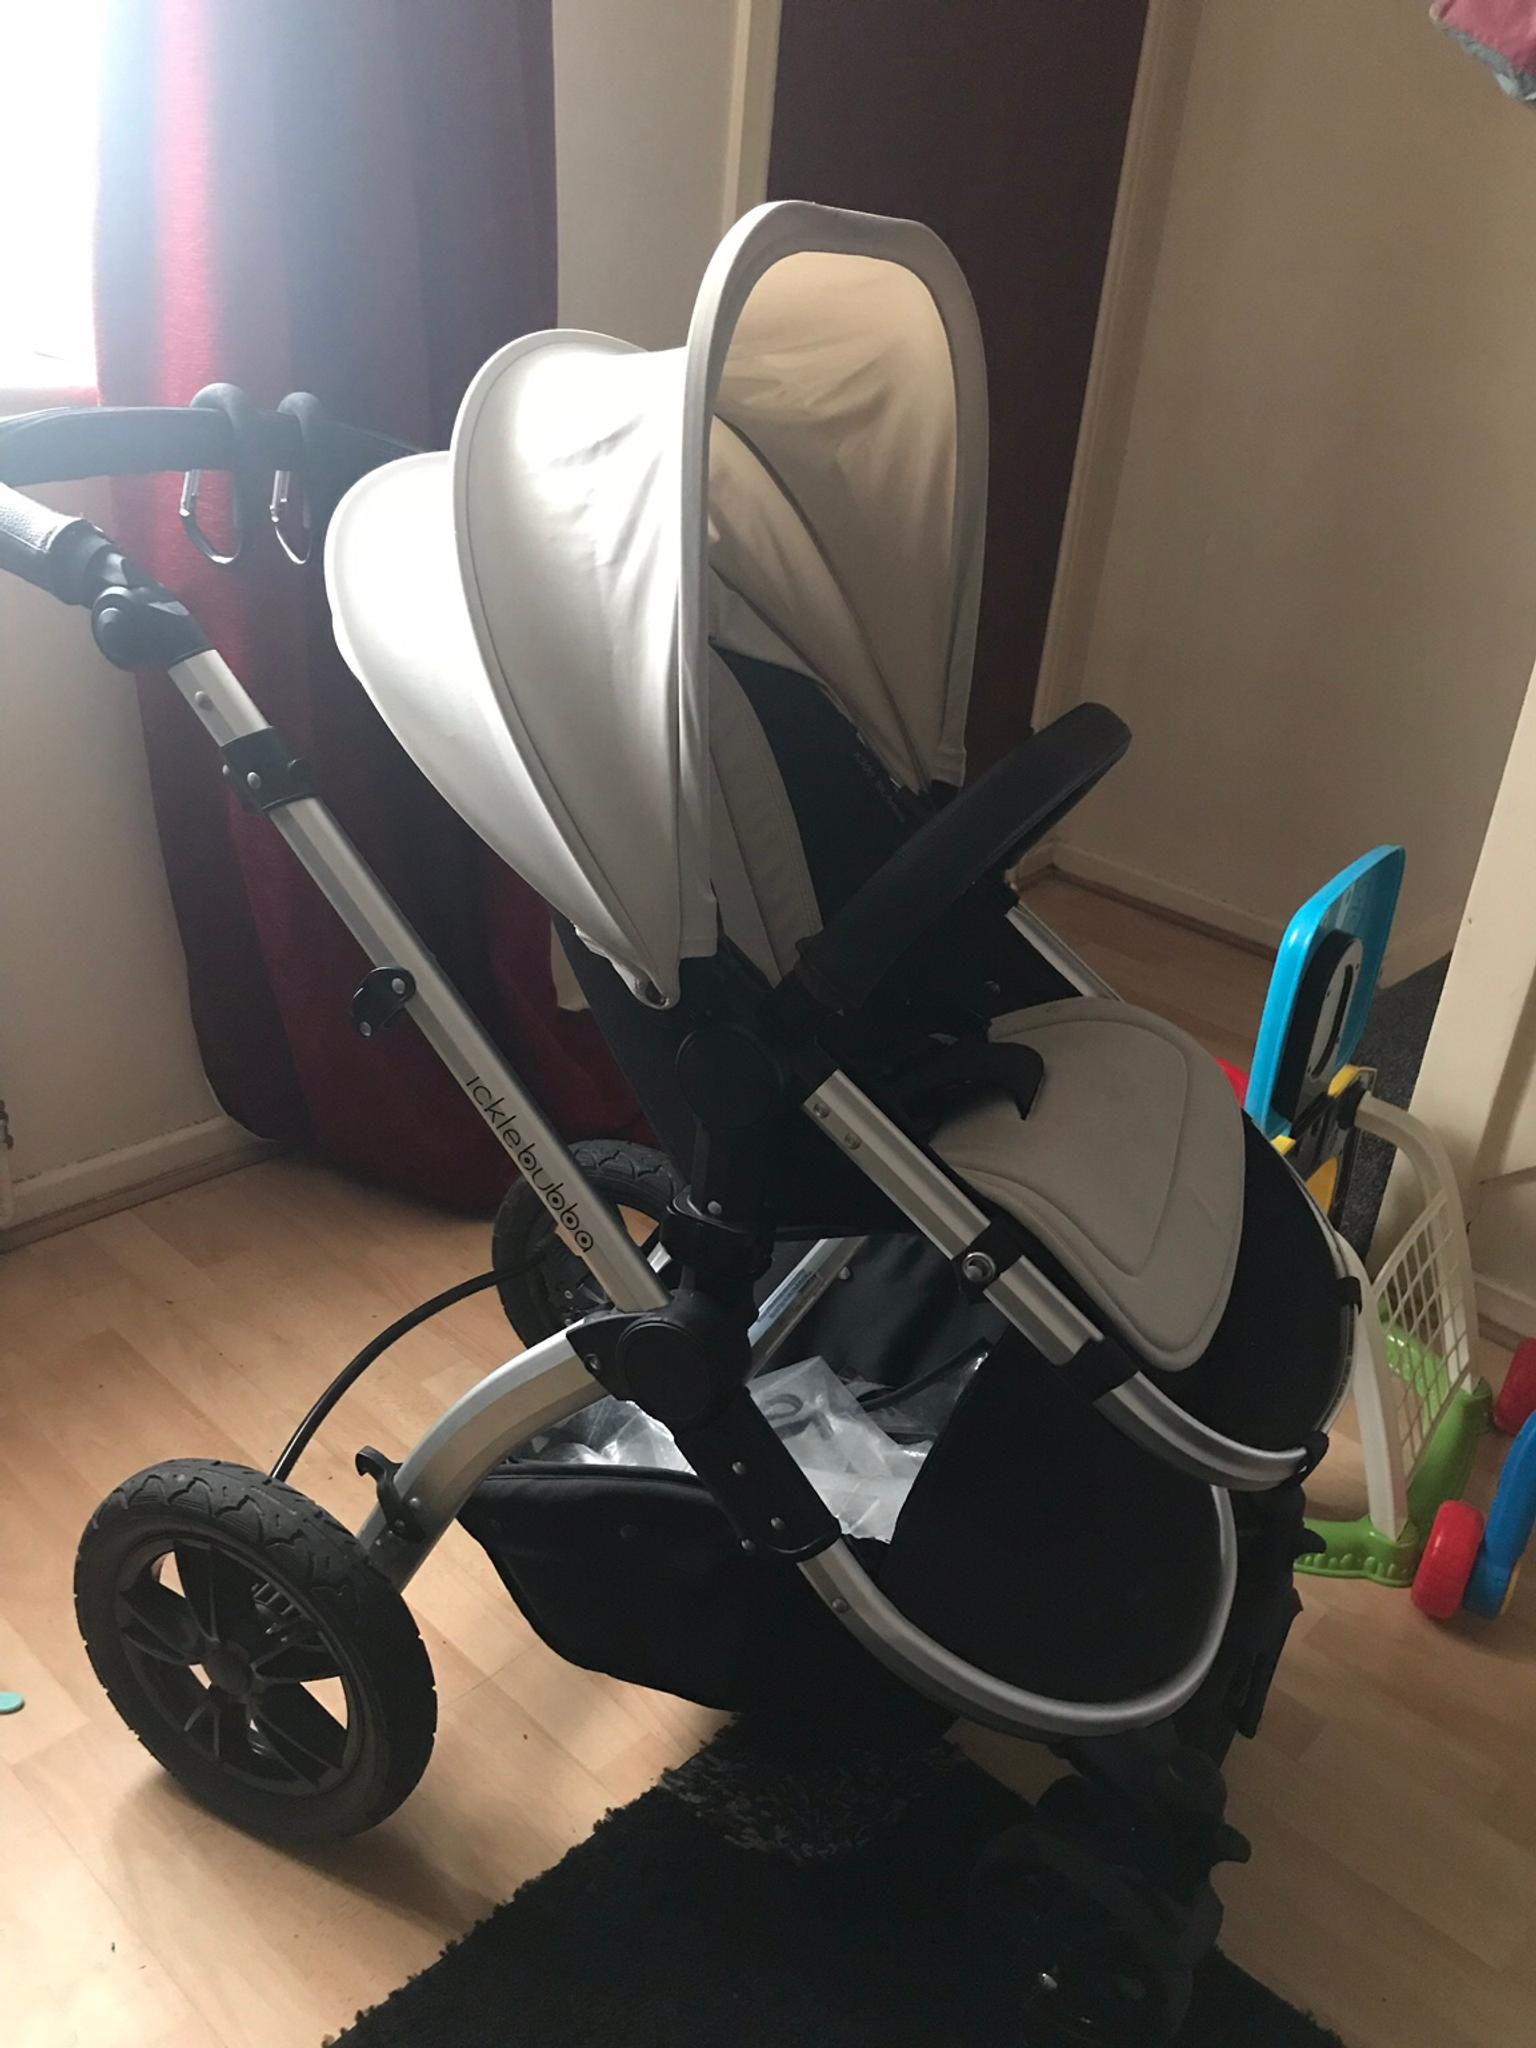 ickle bubba stomp v2 all in one travel system